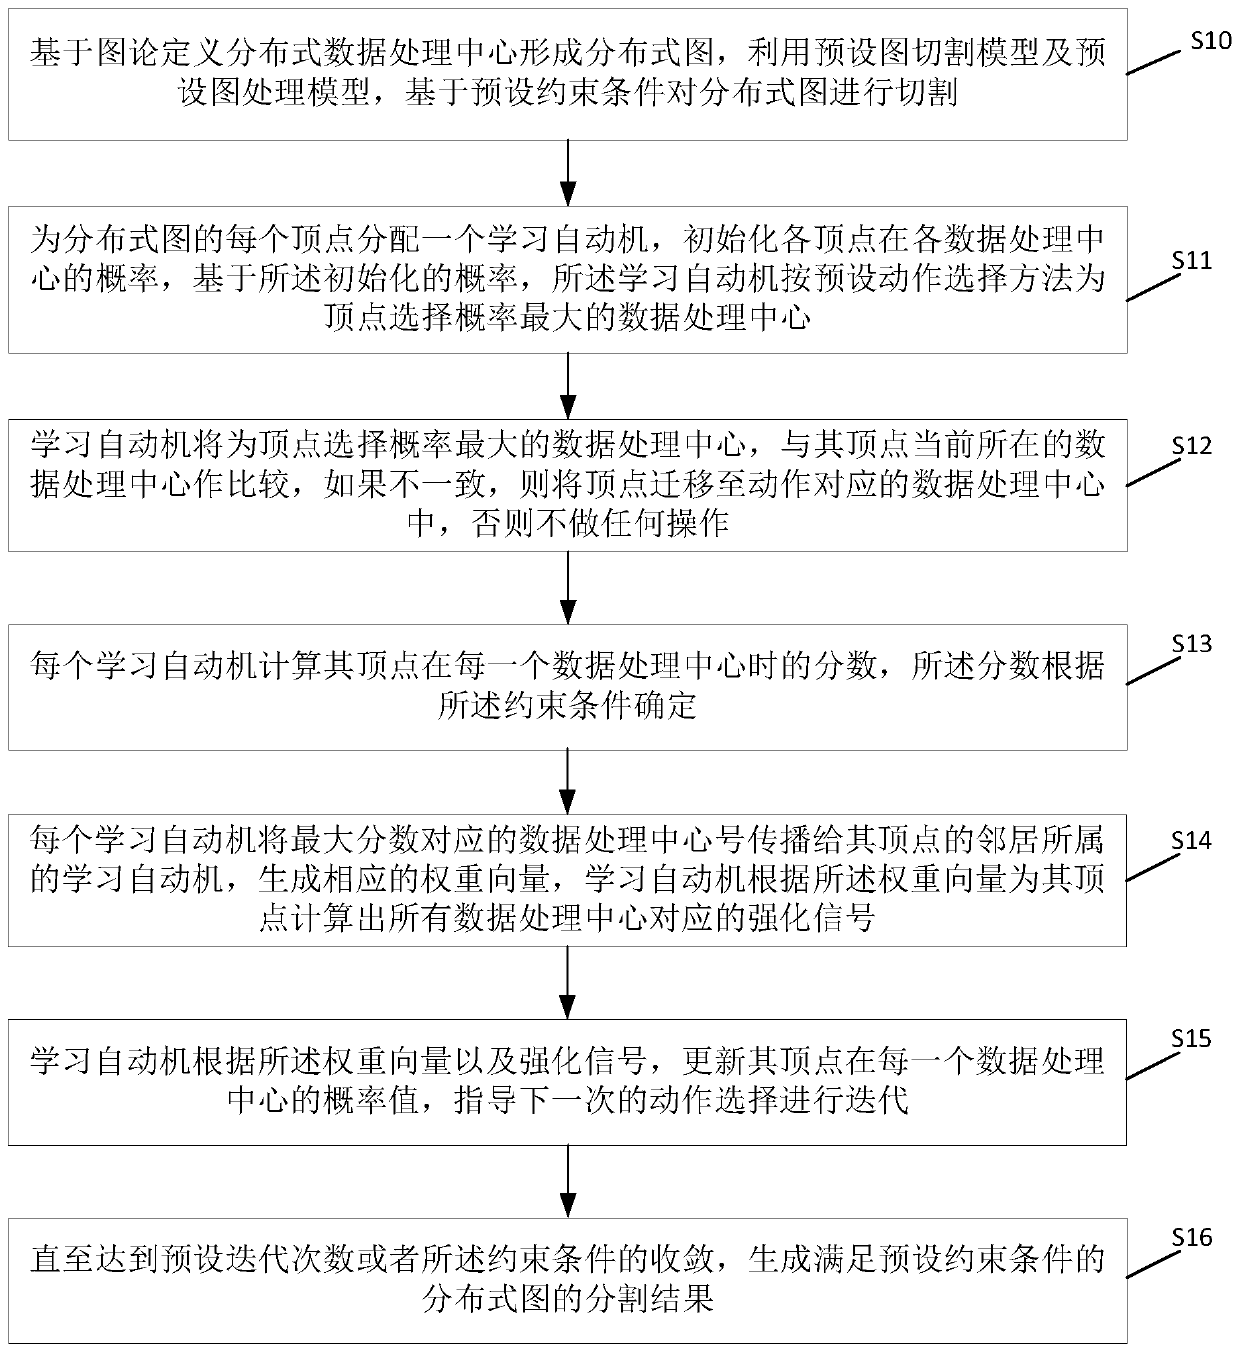 General distributed graph processing method and system based on reinforcement learning